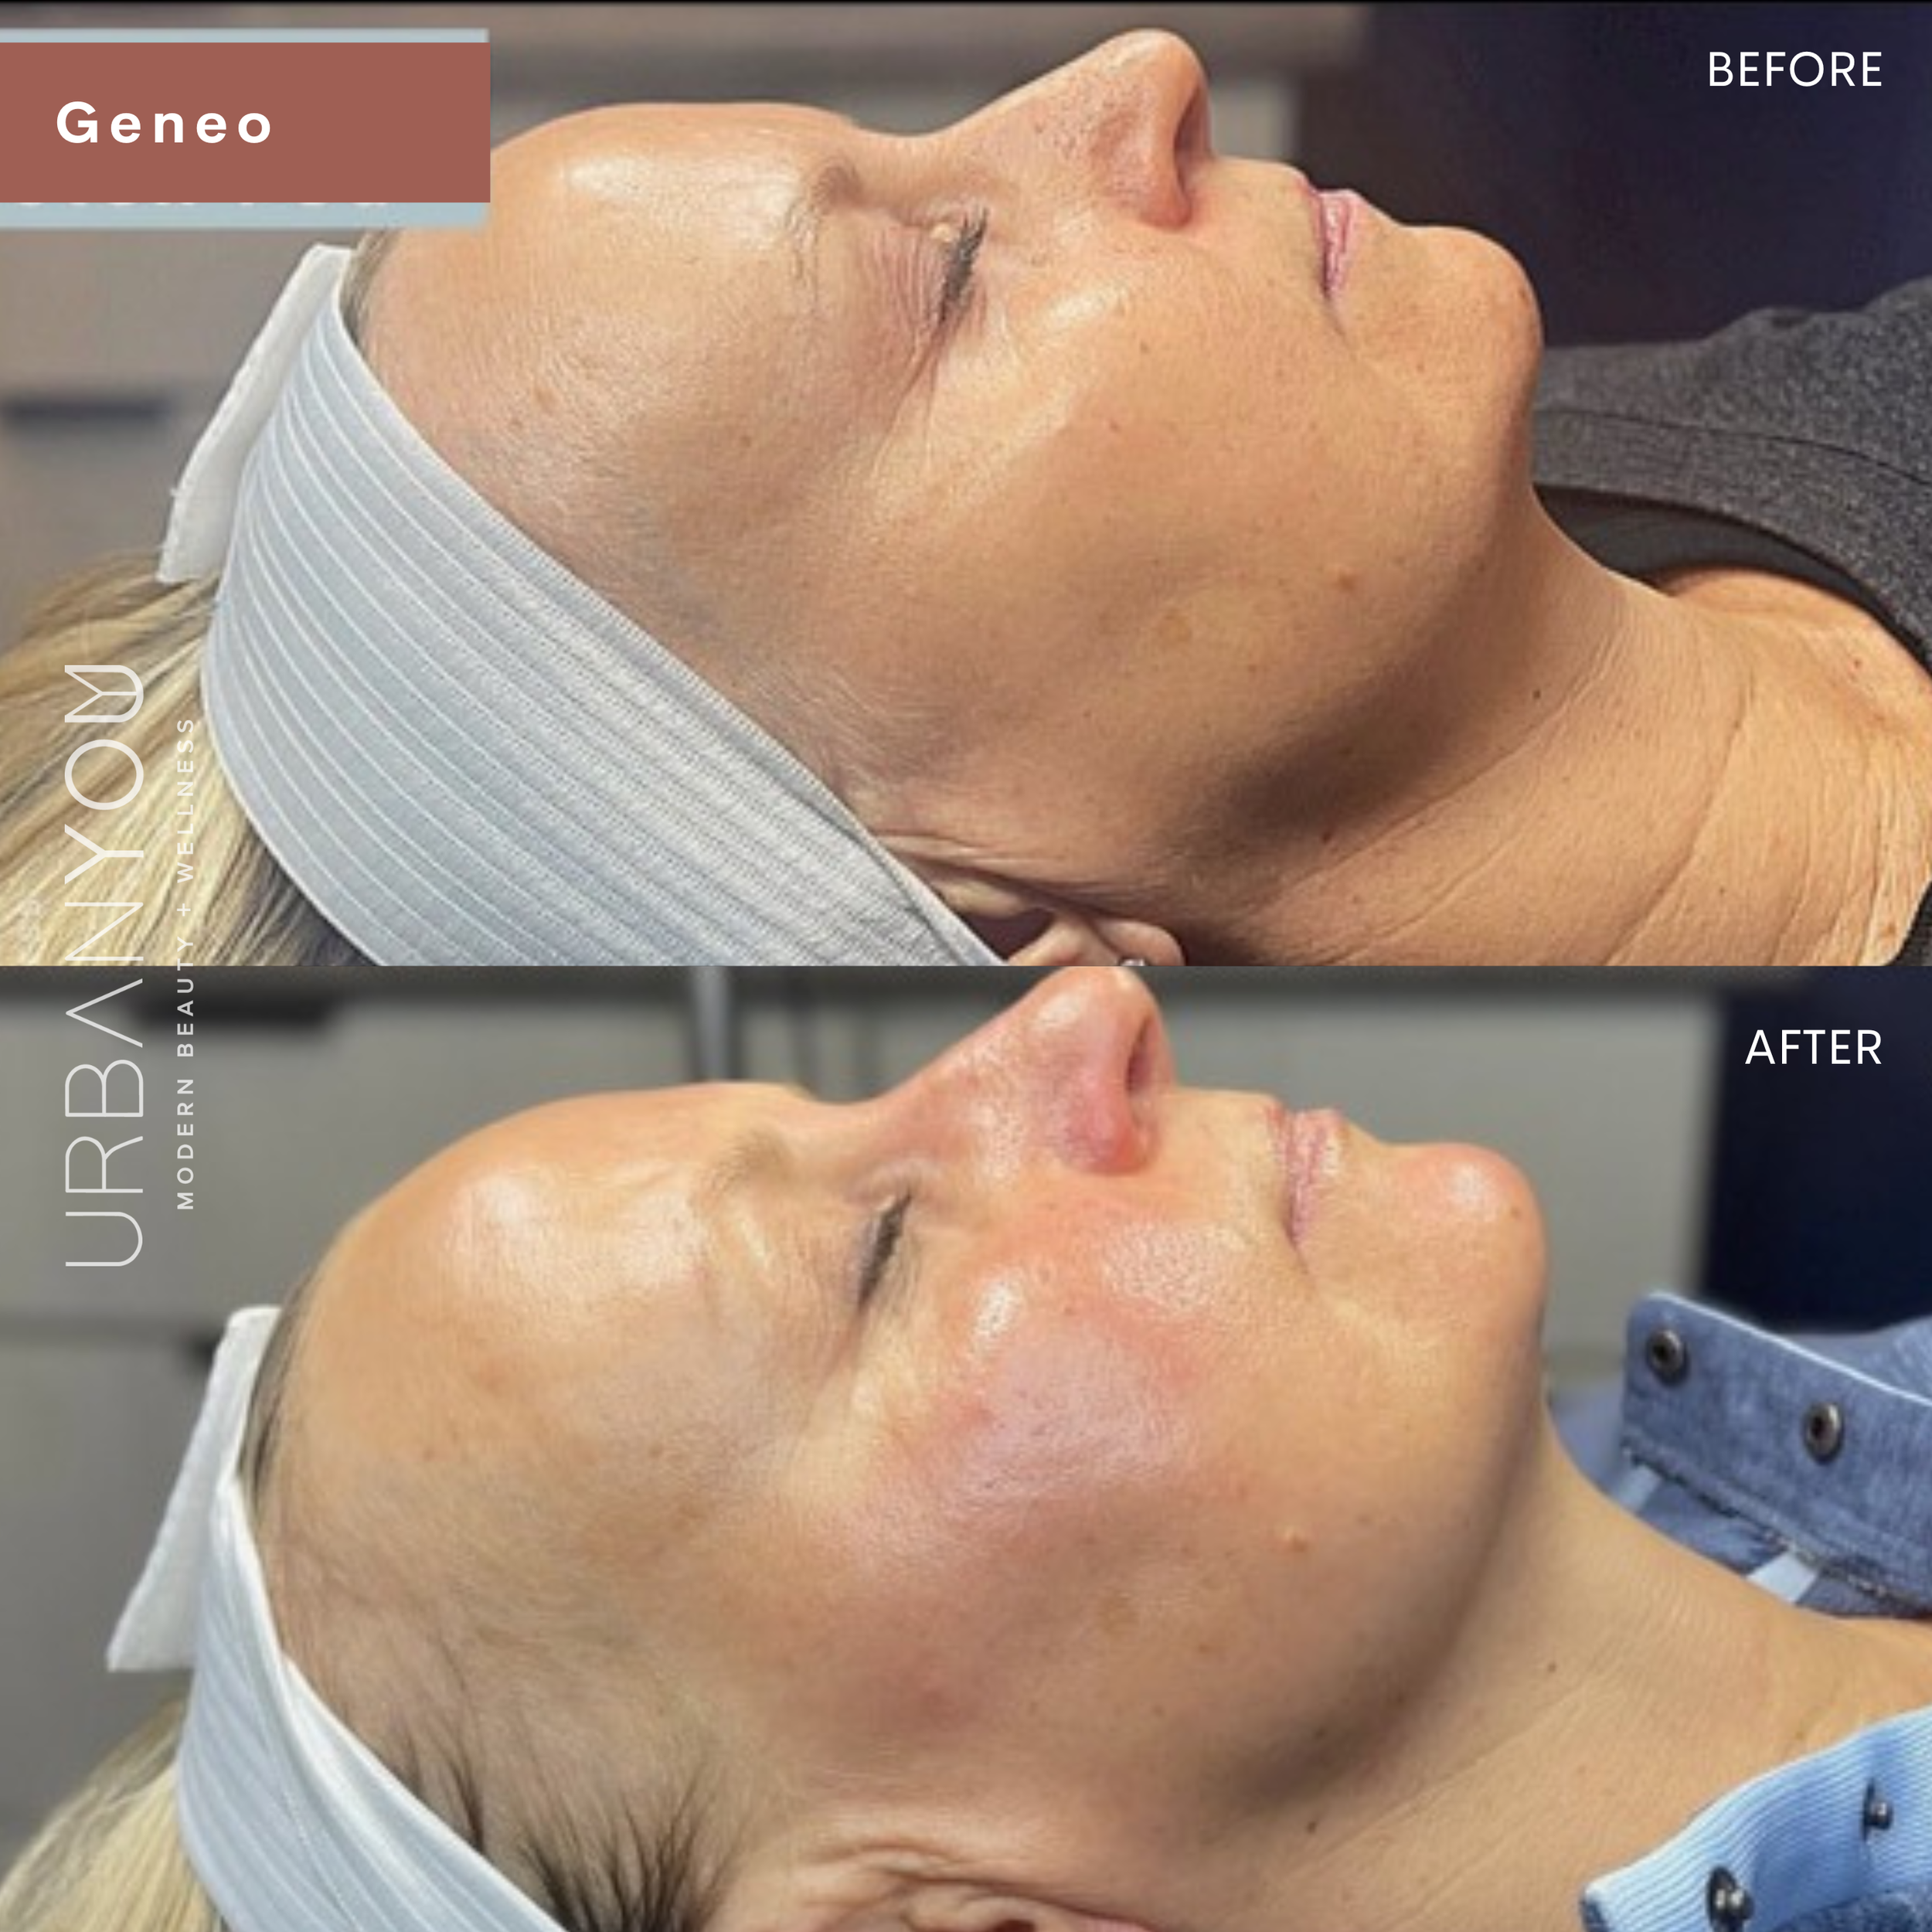 Glo2Facial / OxyGeneo before and after photo at Urban You medical spa